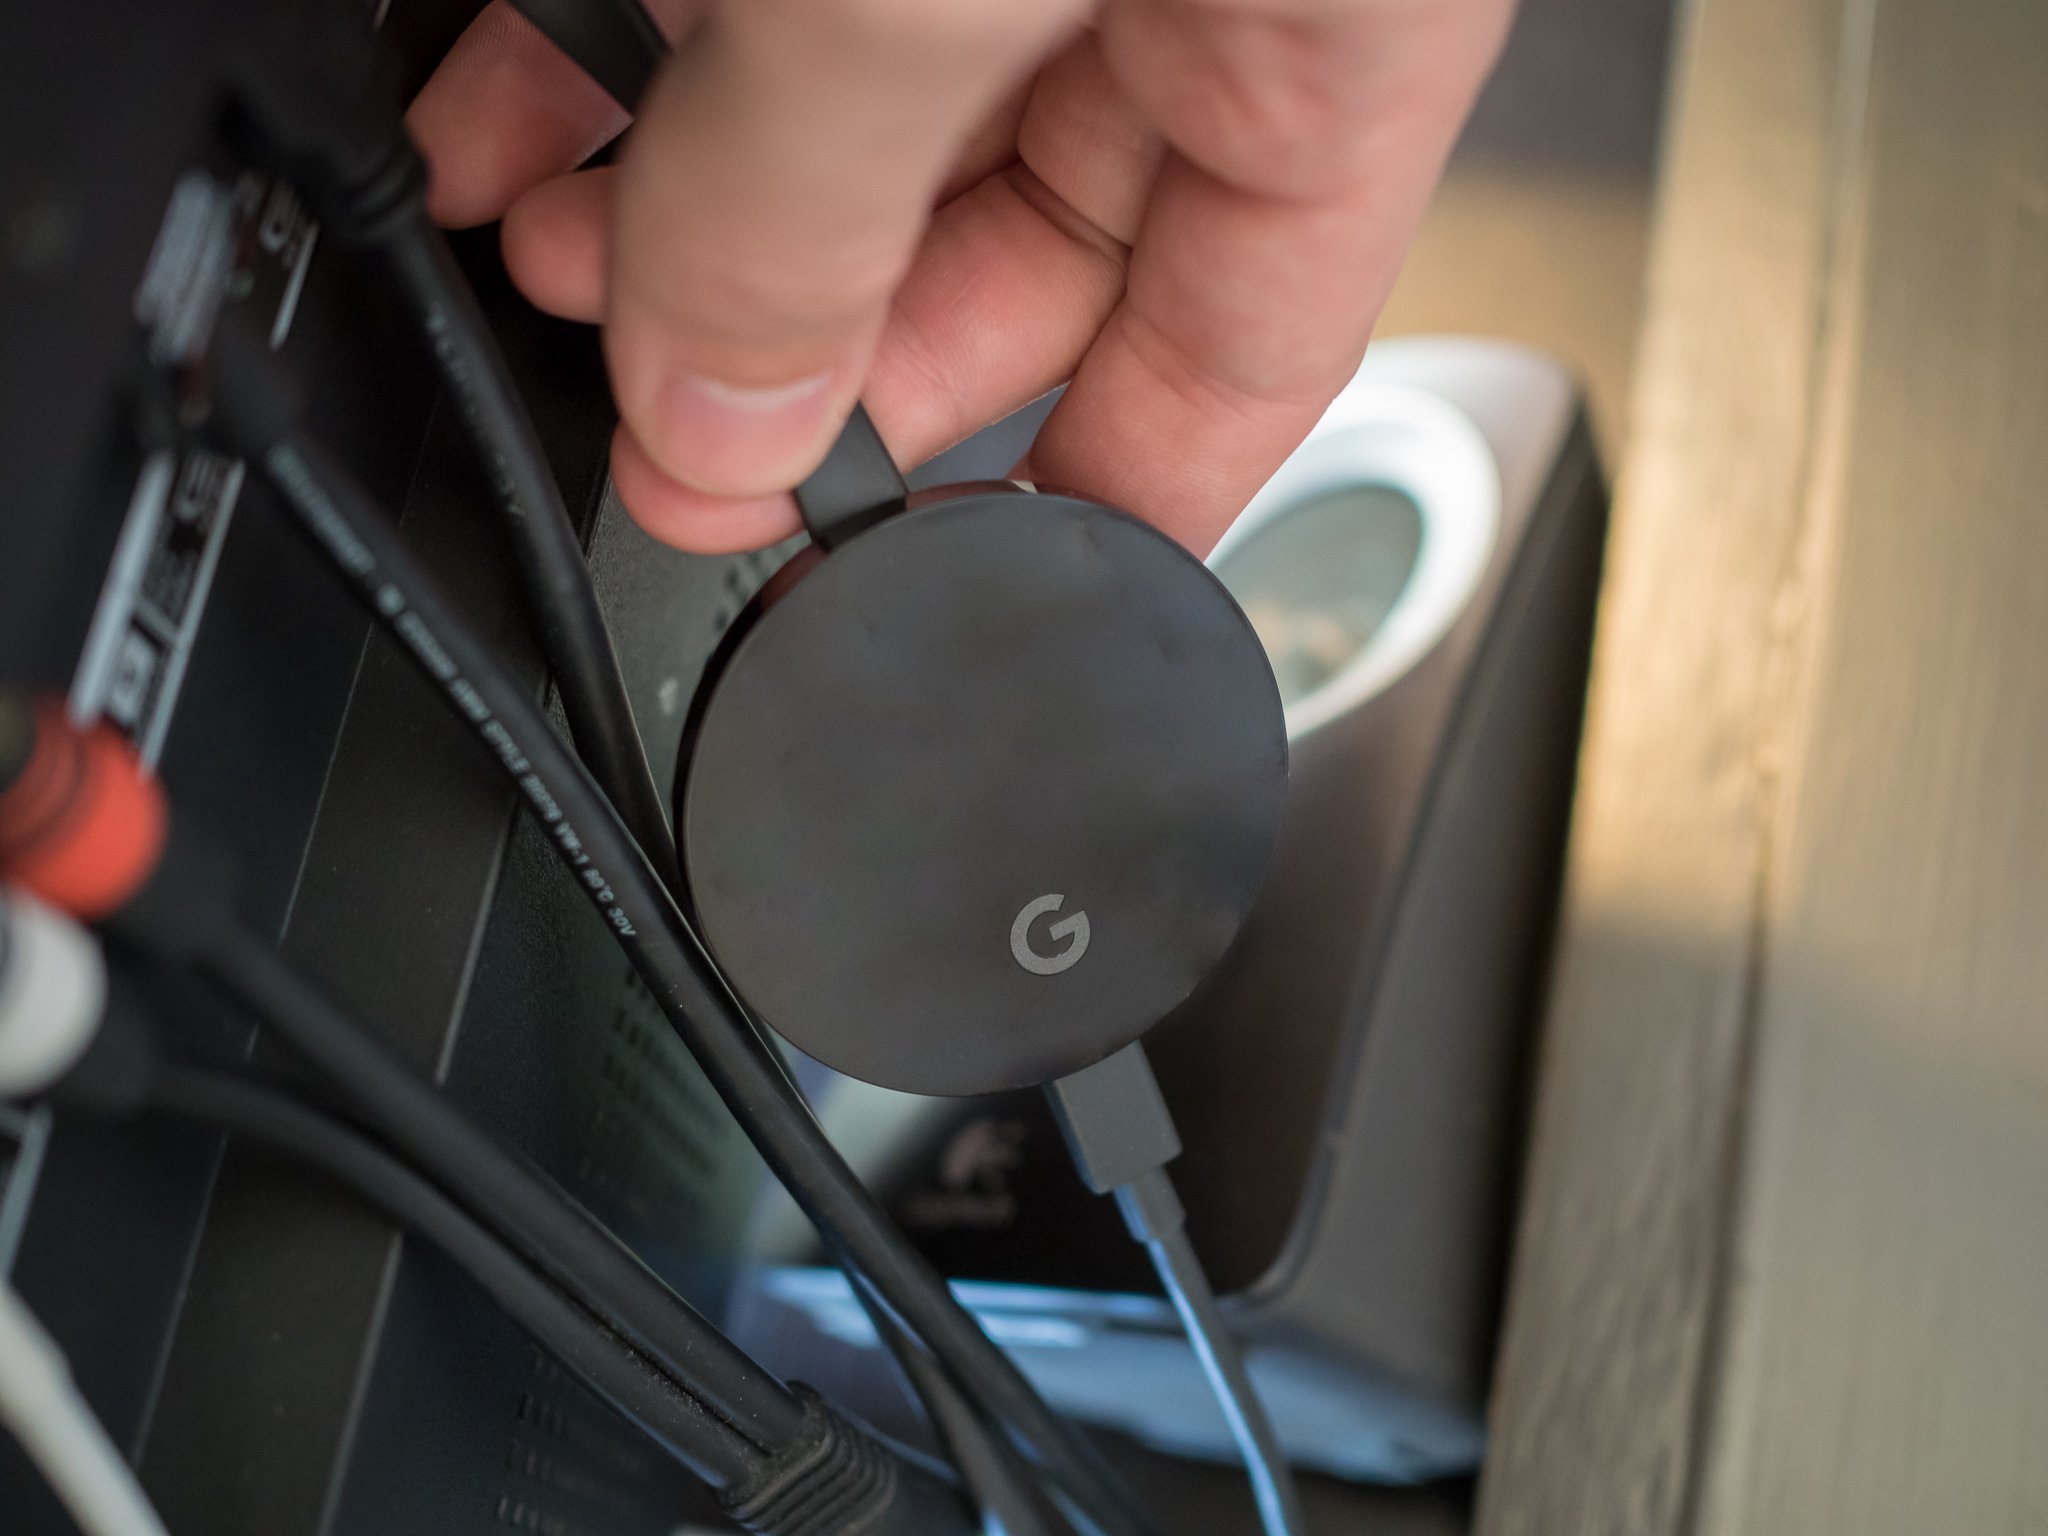 Unplug both Google Home and Chromecast from power sources.
Wait for at least 10 seconds before plugging them back in.